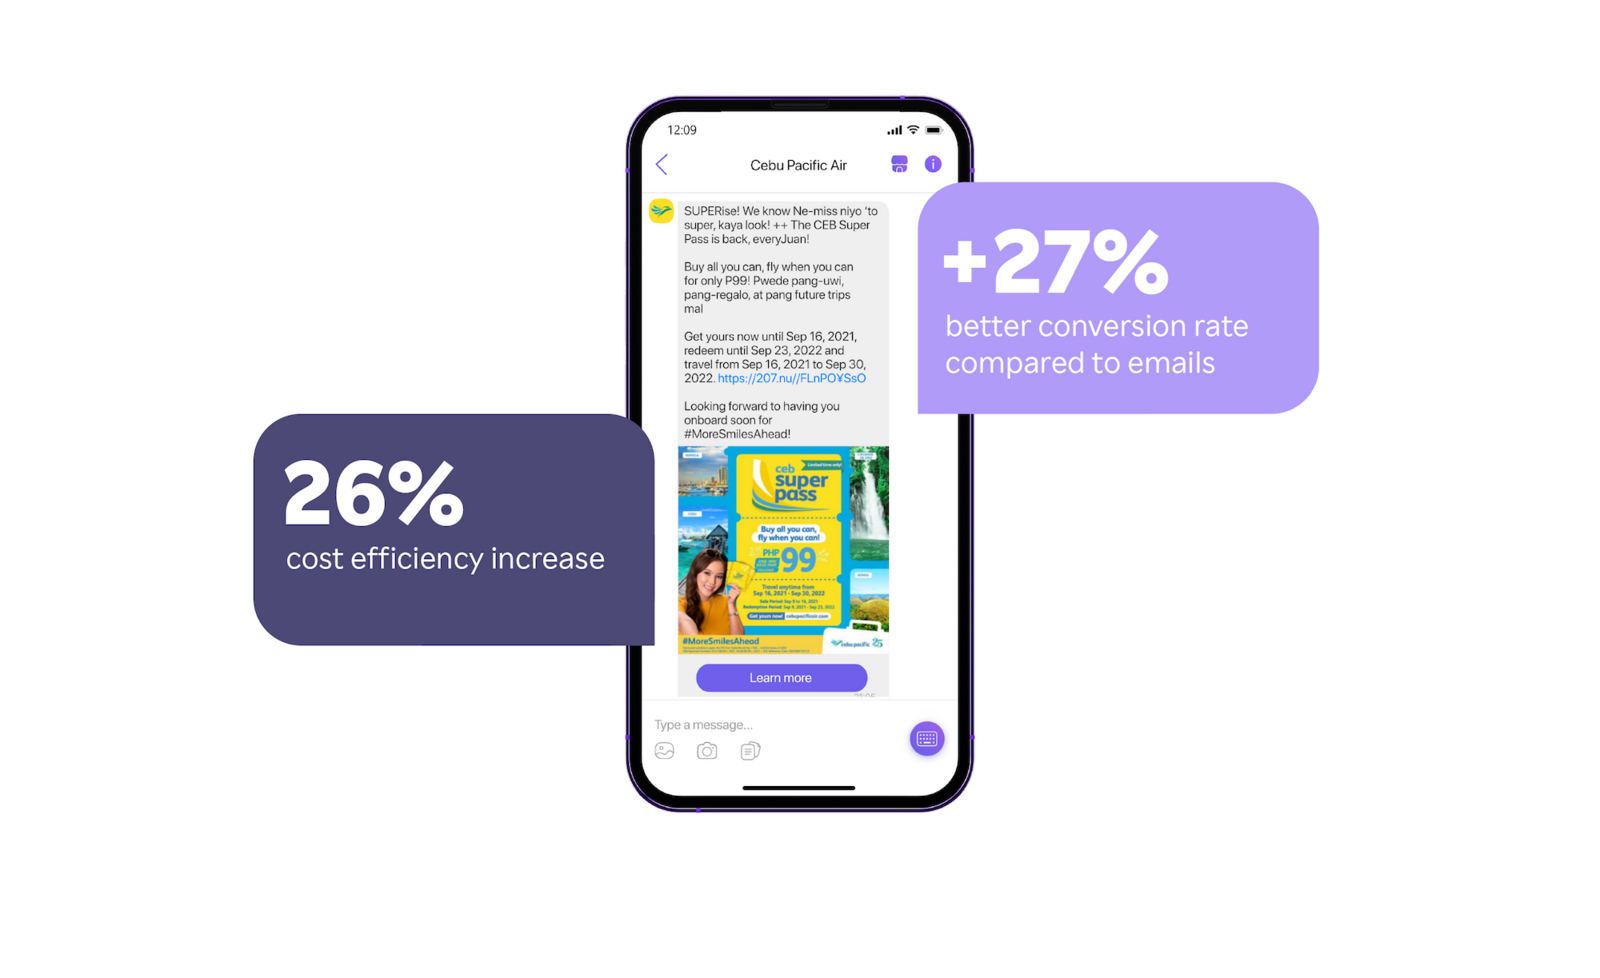 Cebu Pacific using Viber Business Messages to drive sales